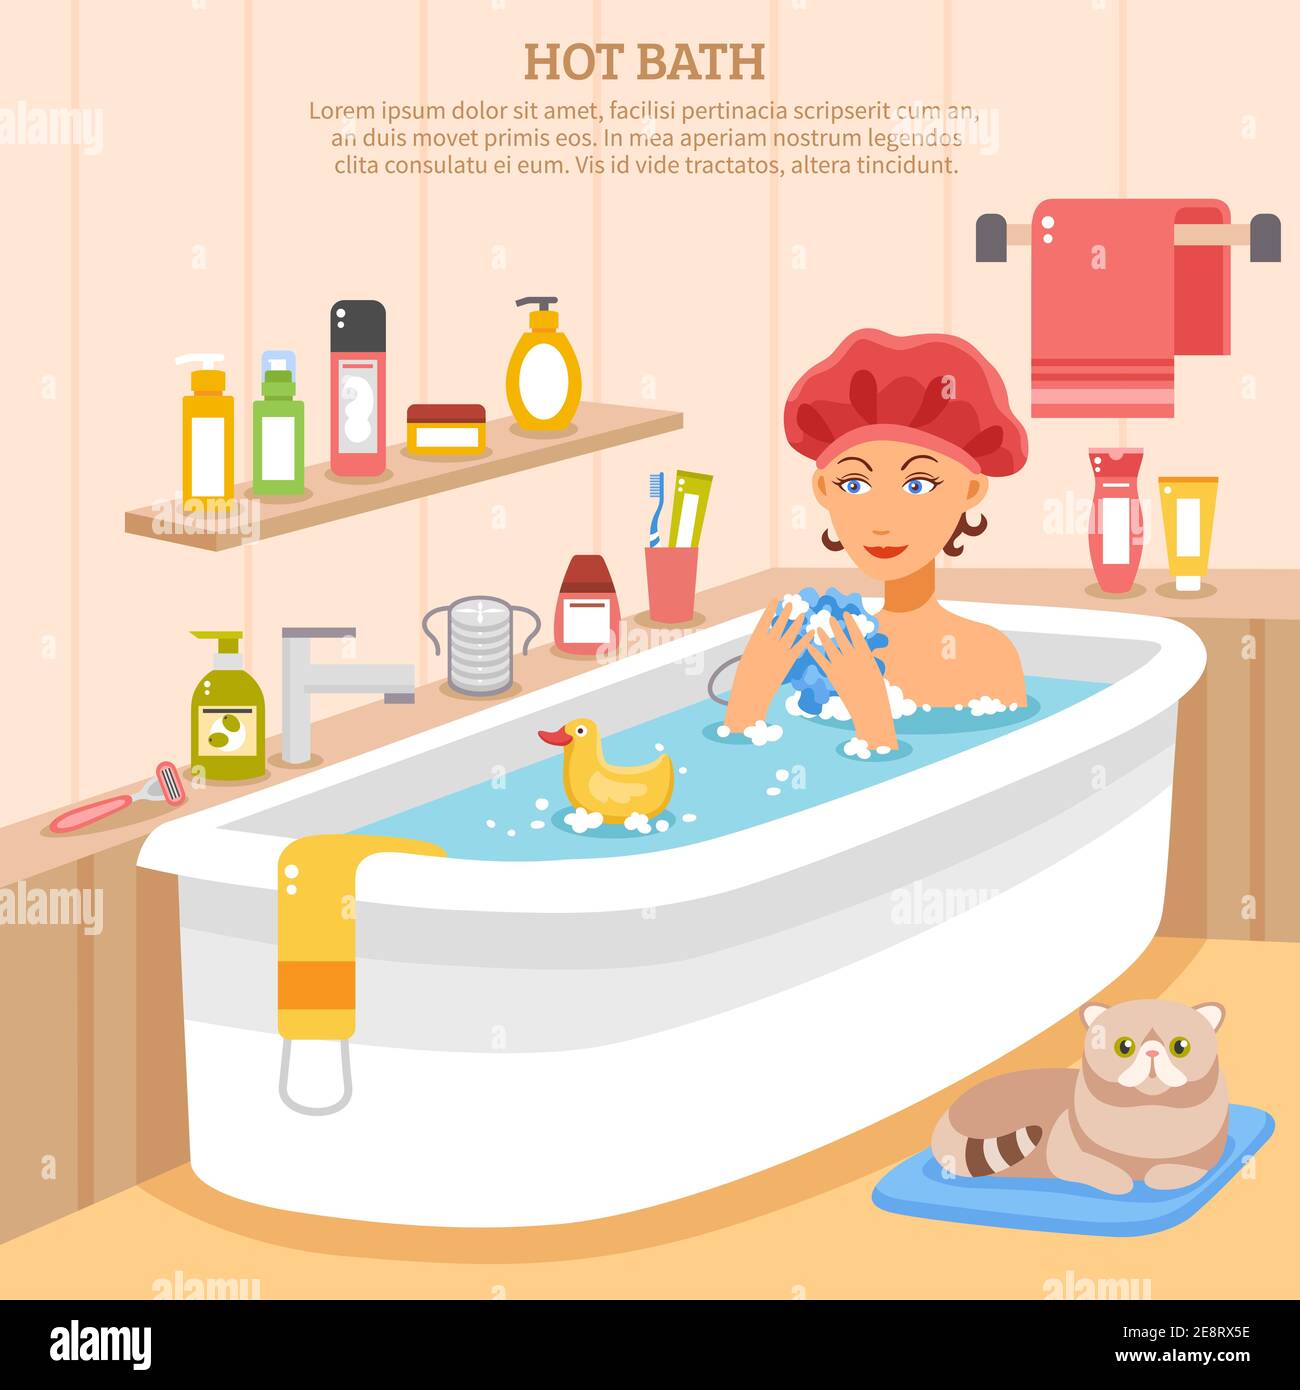 Hot bath poster with woman in soapy water cat on mat and hygiene items vector illustration Stock Vector